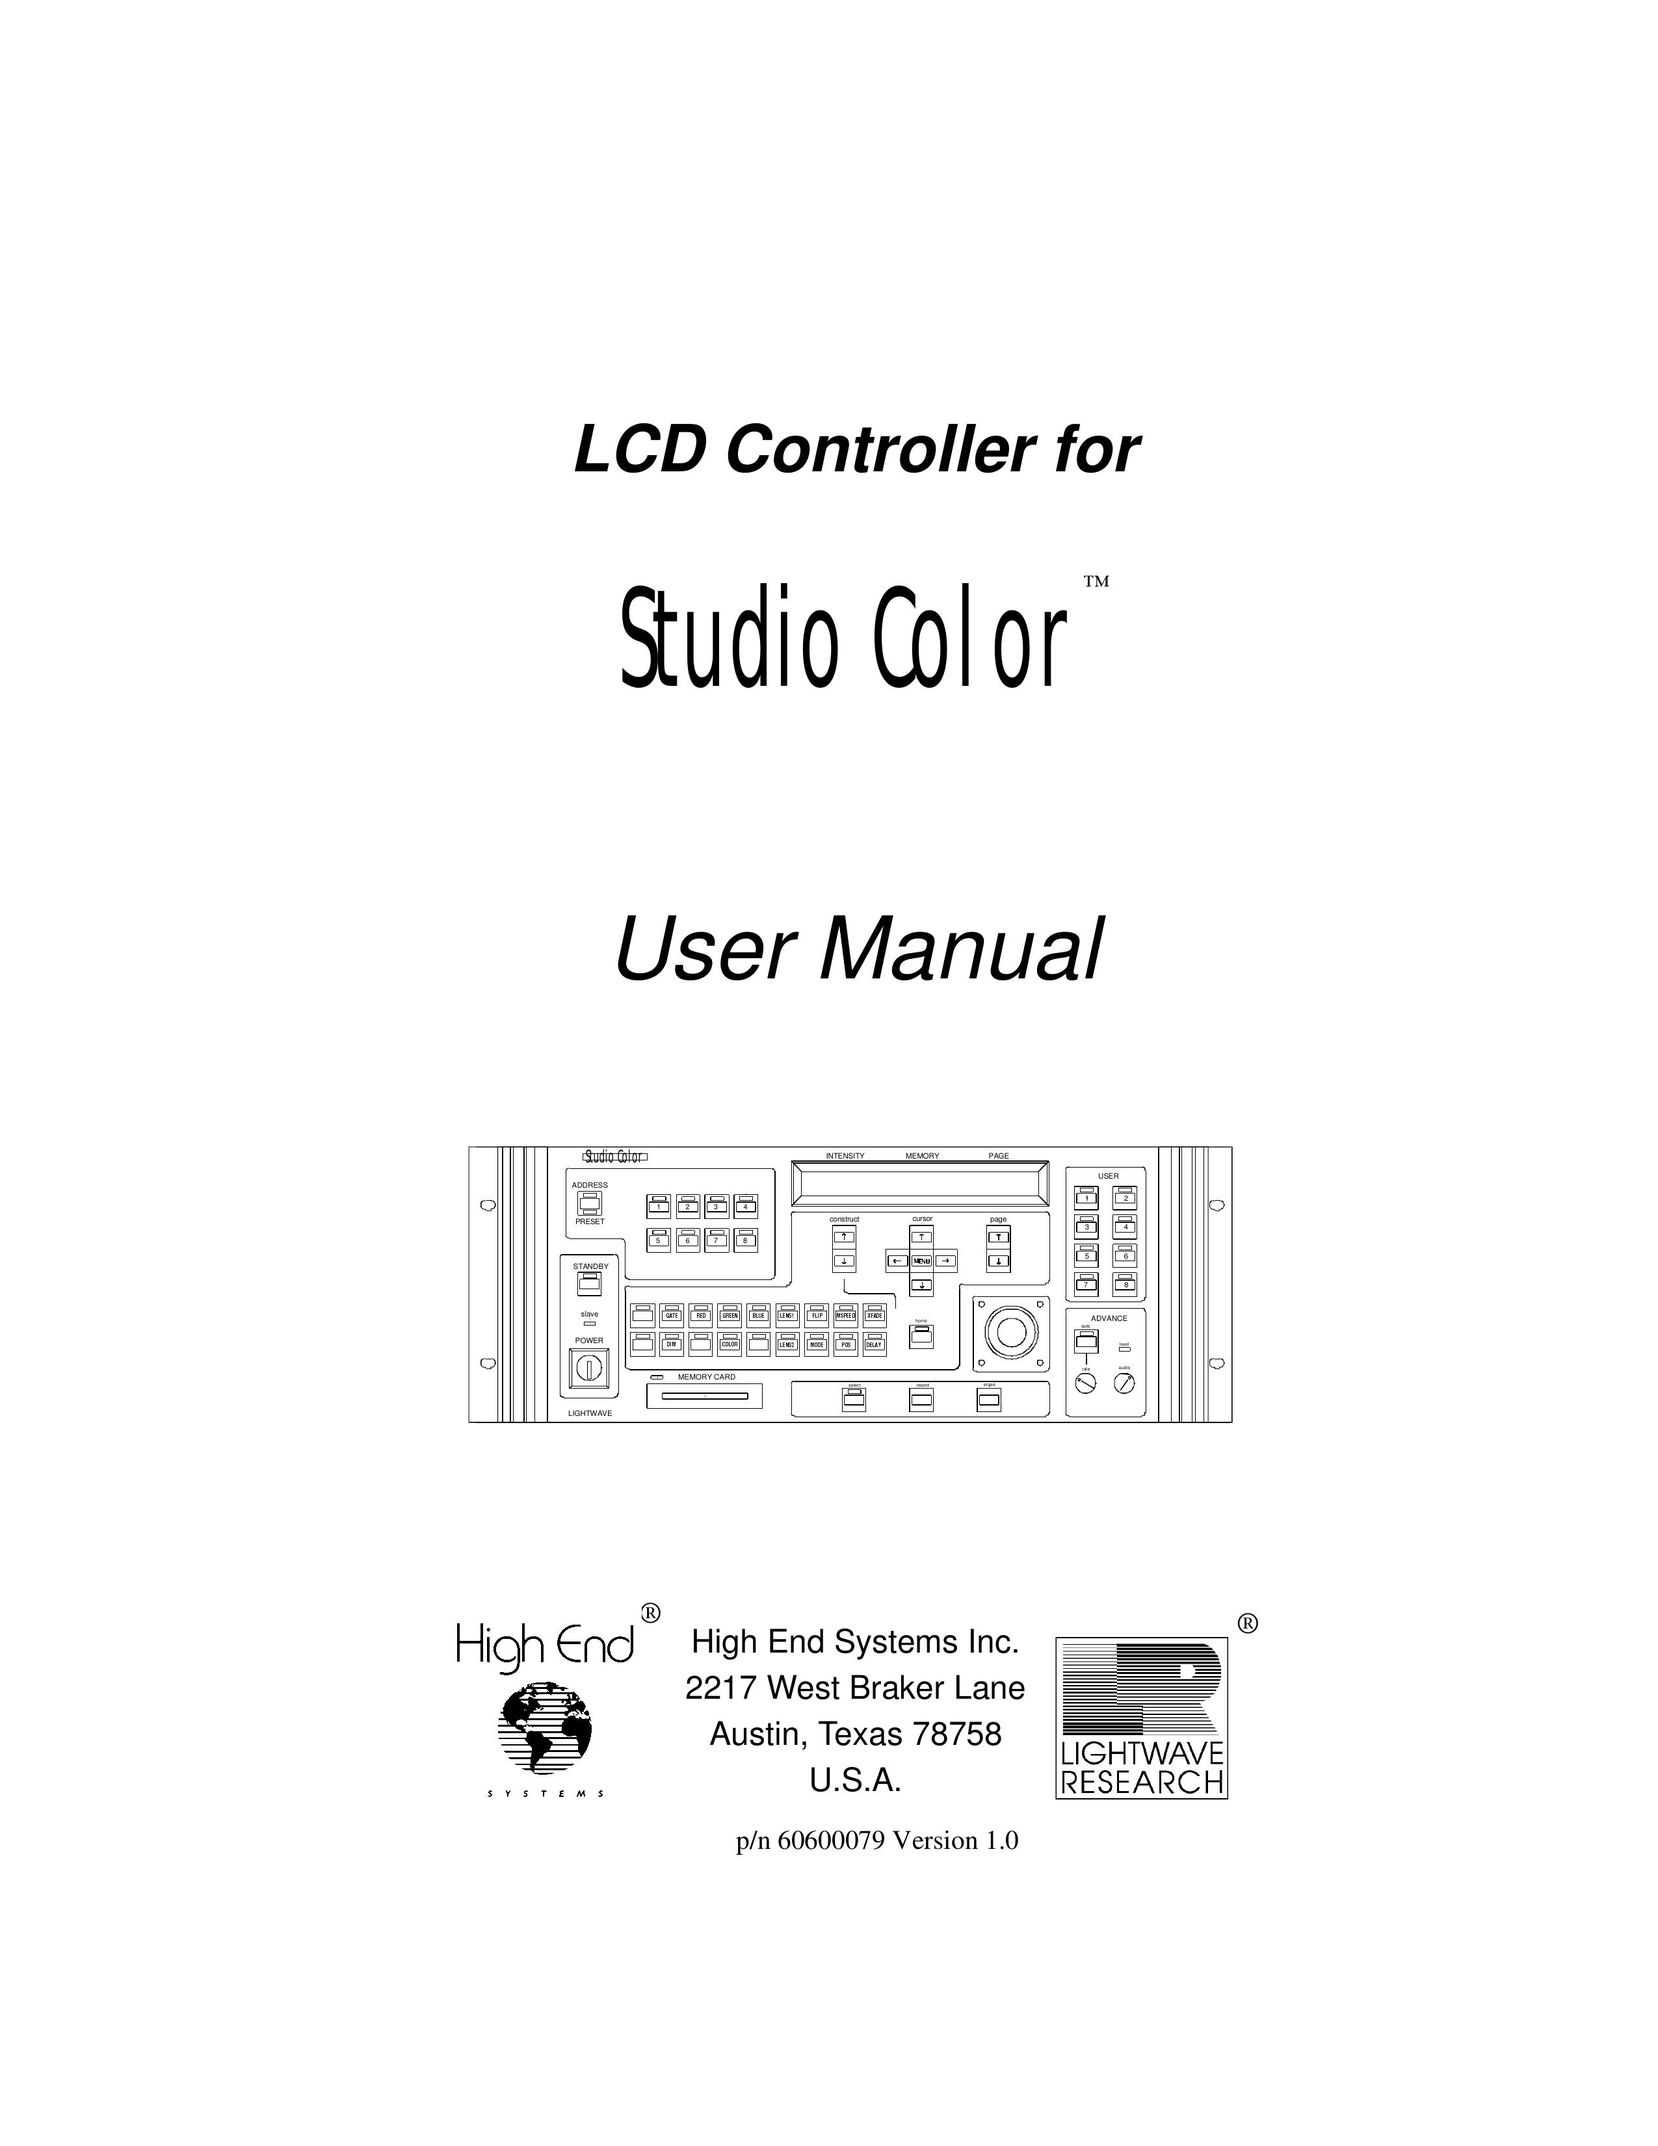 High End Systems High End LCD Controller for Studio Color Speaker System User Manual